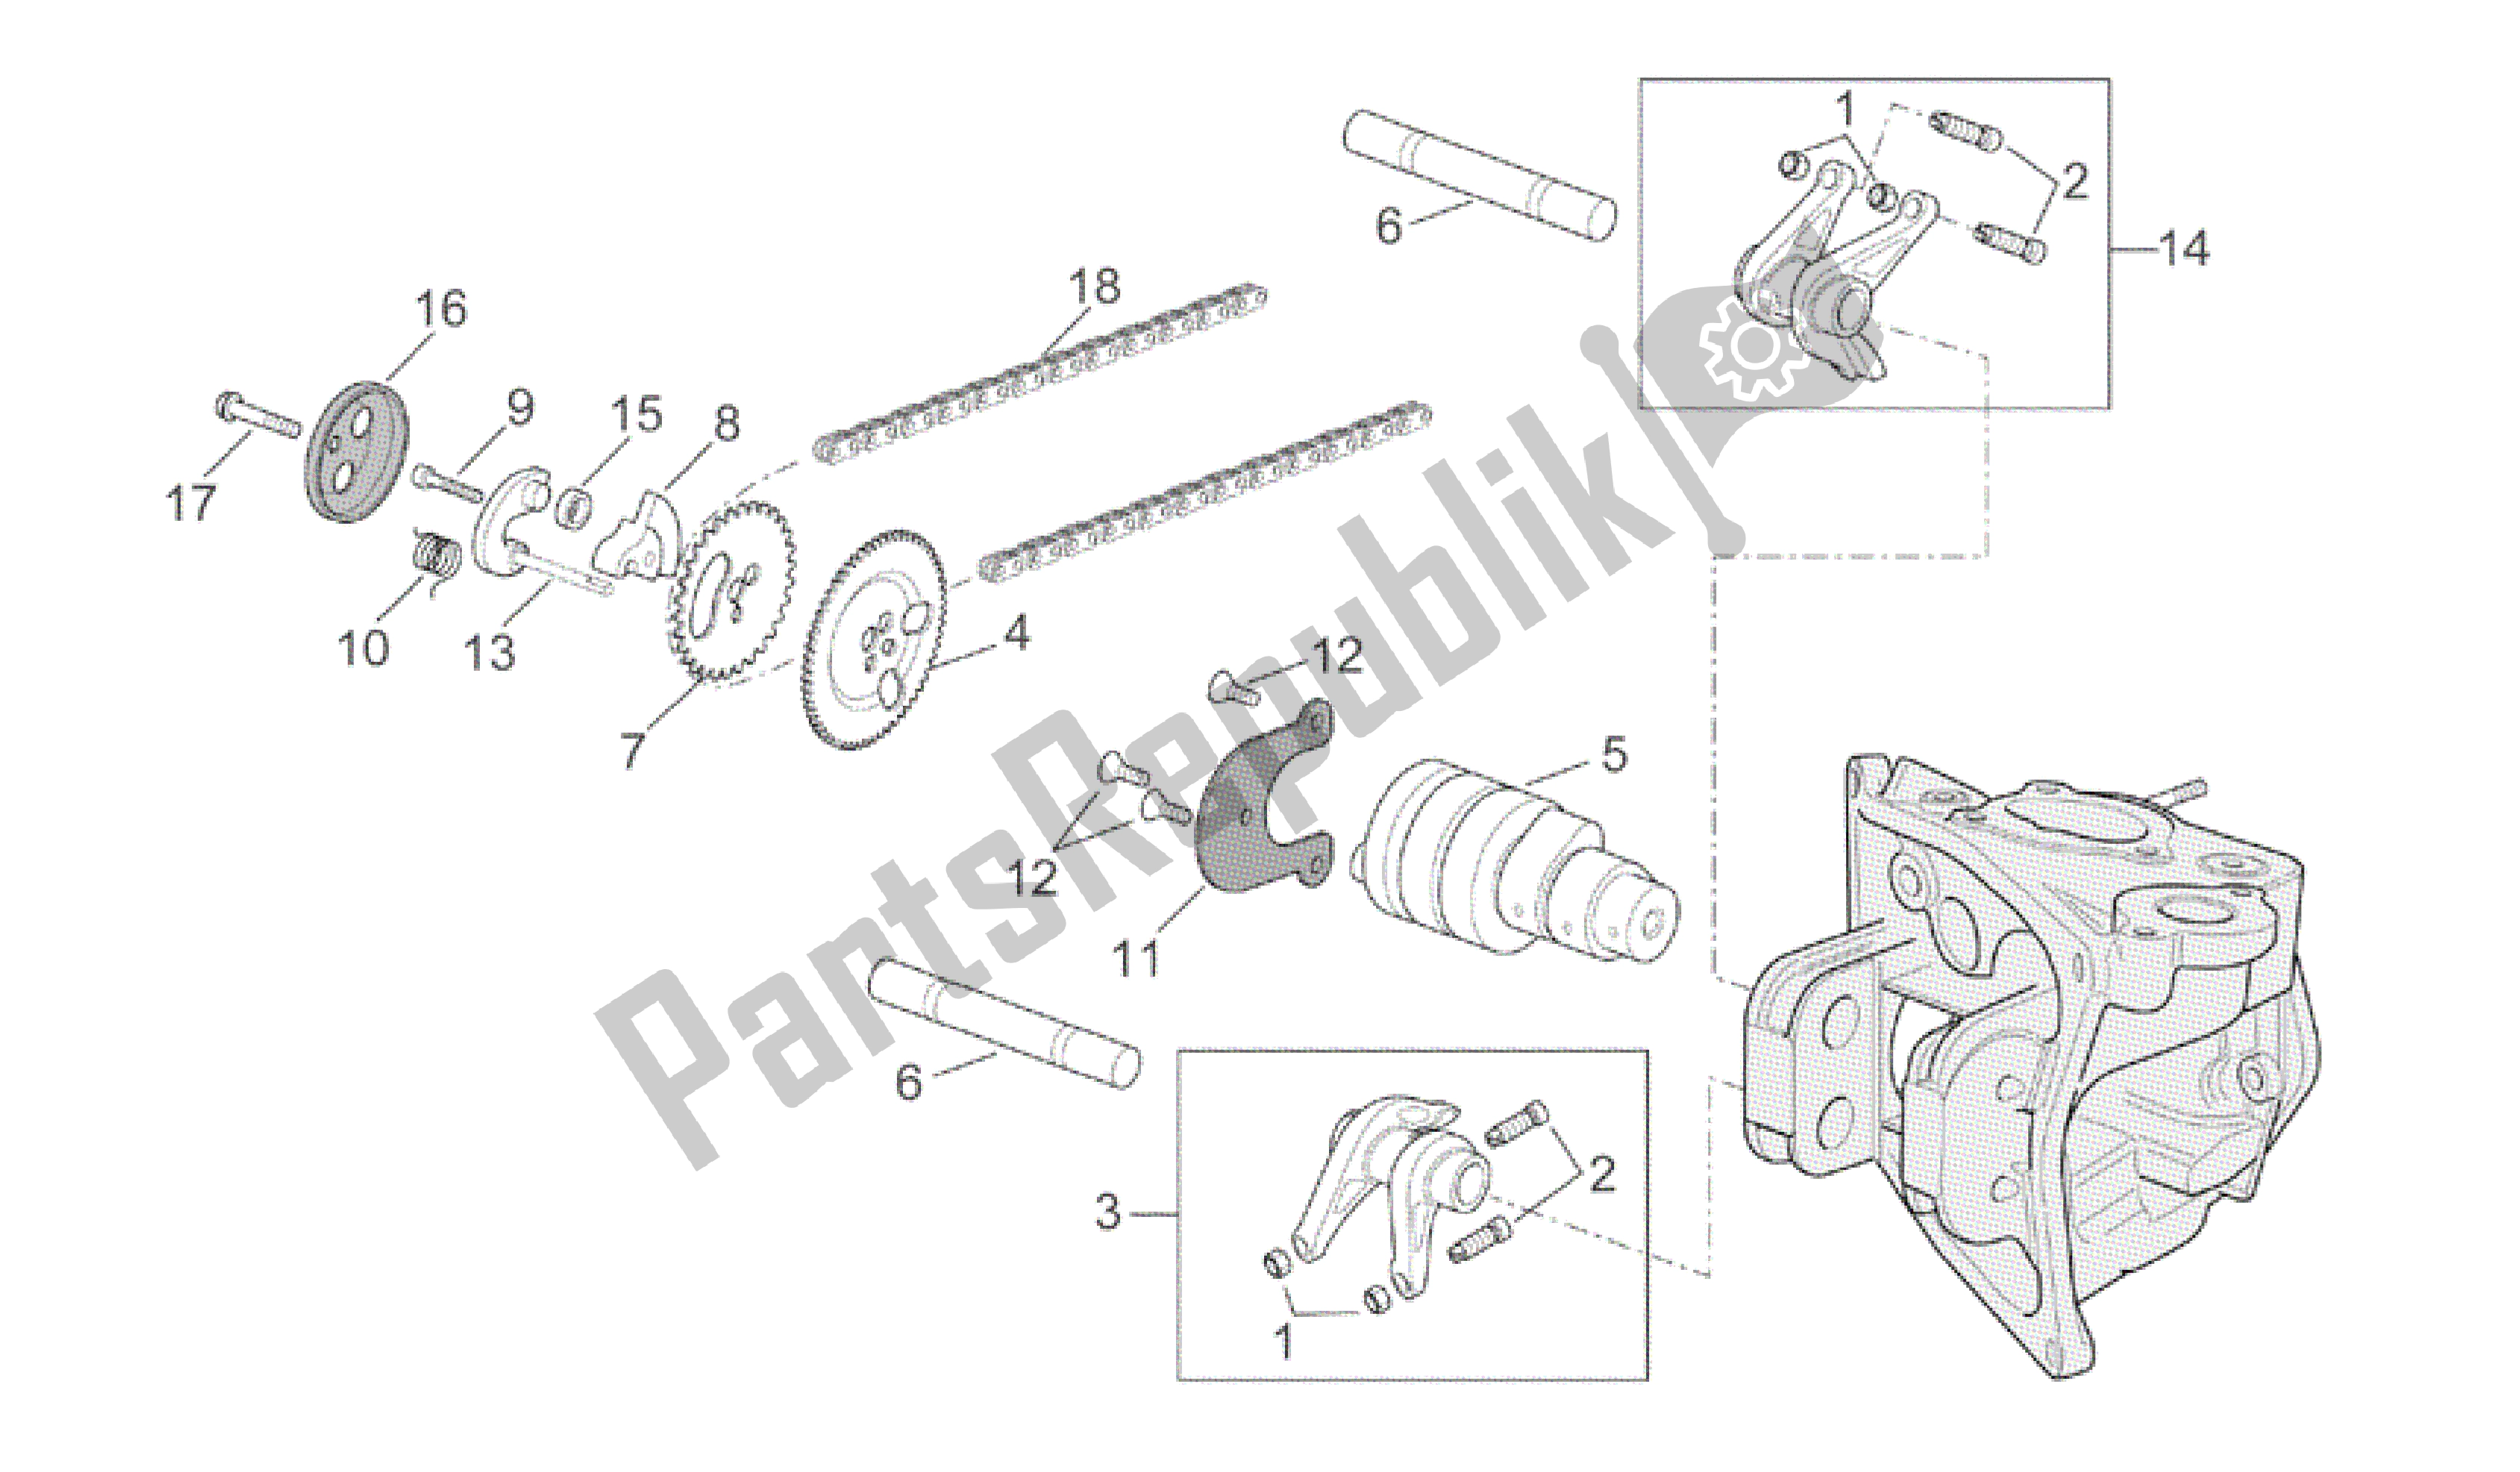 All parts for the Valve Control of the Aprilia Scarabeo 500 2003 - 2006